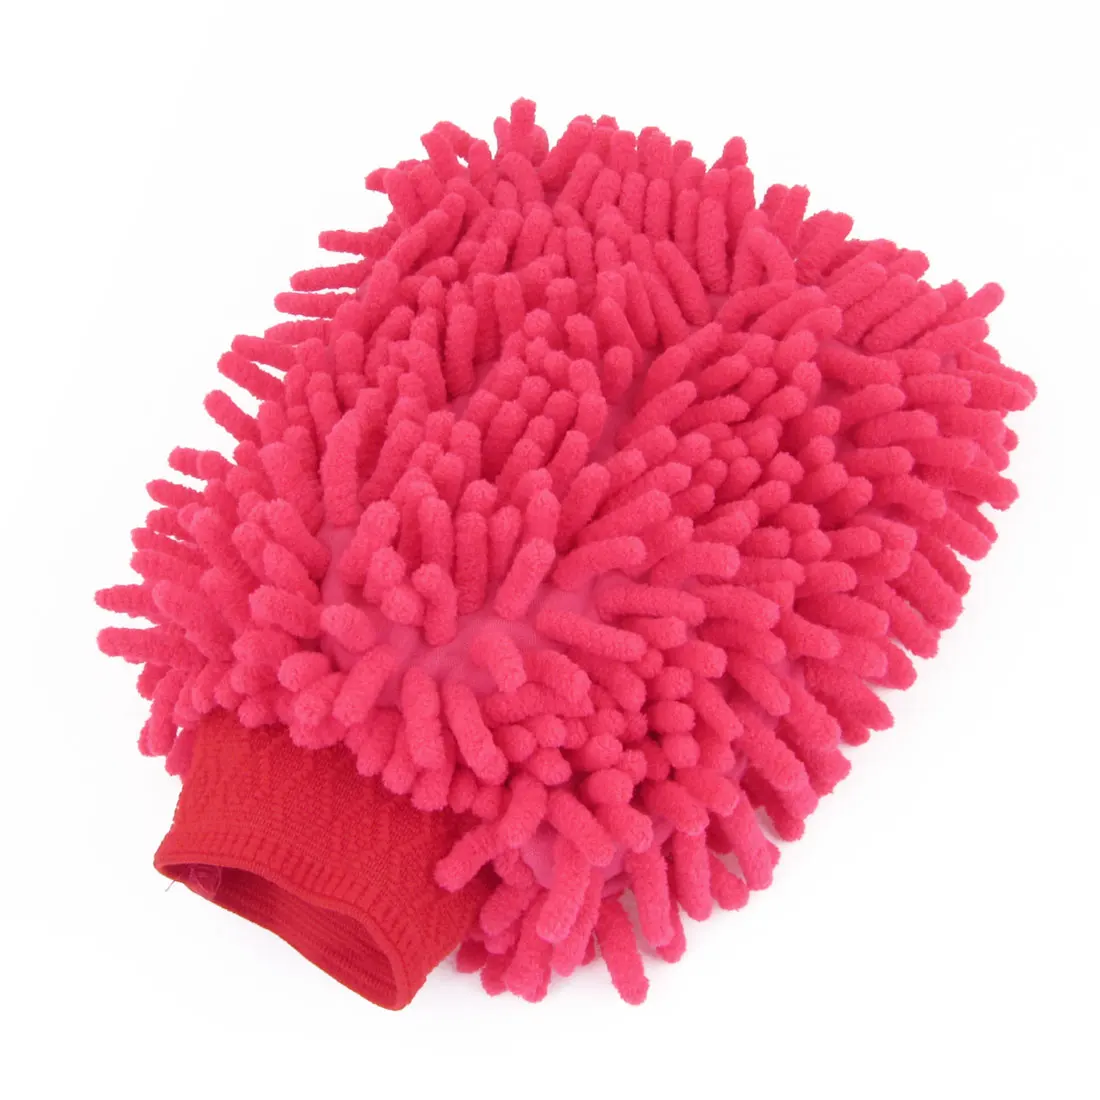 

UXCELL Soft Automotive Car Washing Cleaning Glove Microfiber Chenille Mitten Glove Brush Cleaner Motorcycle Washer Care